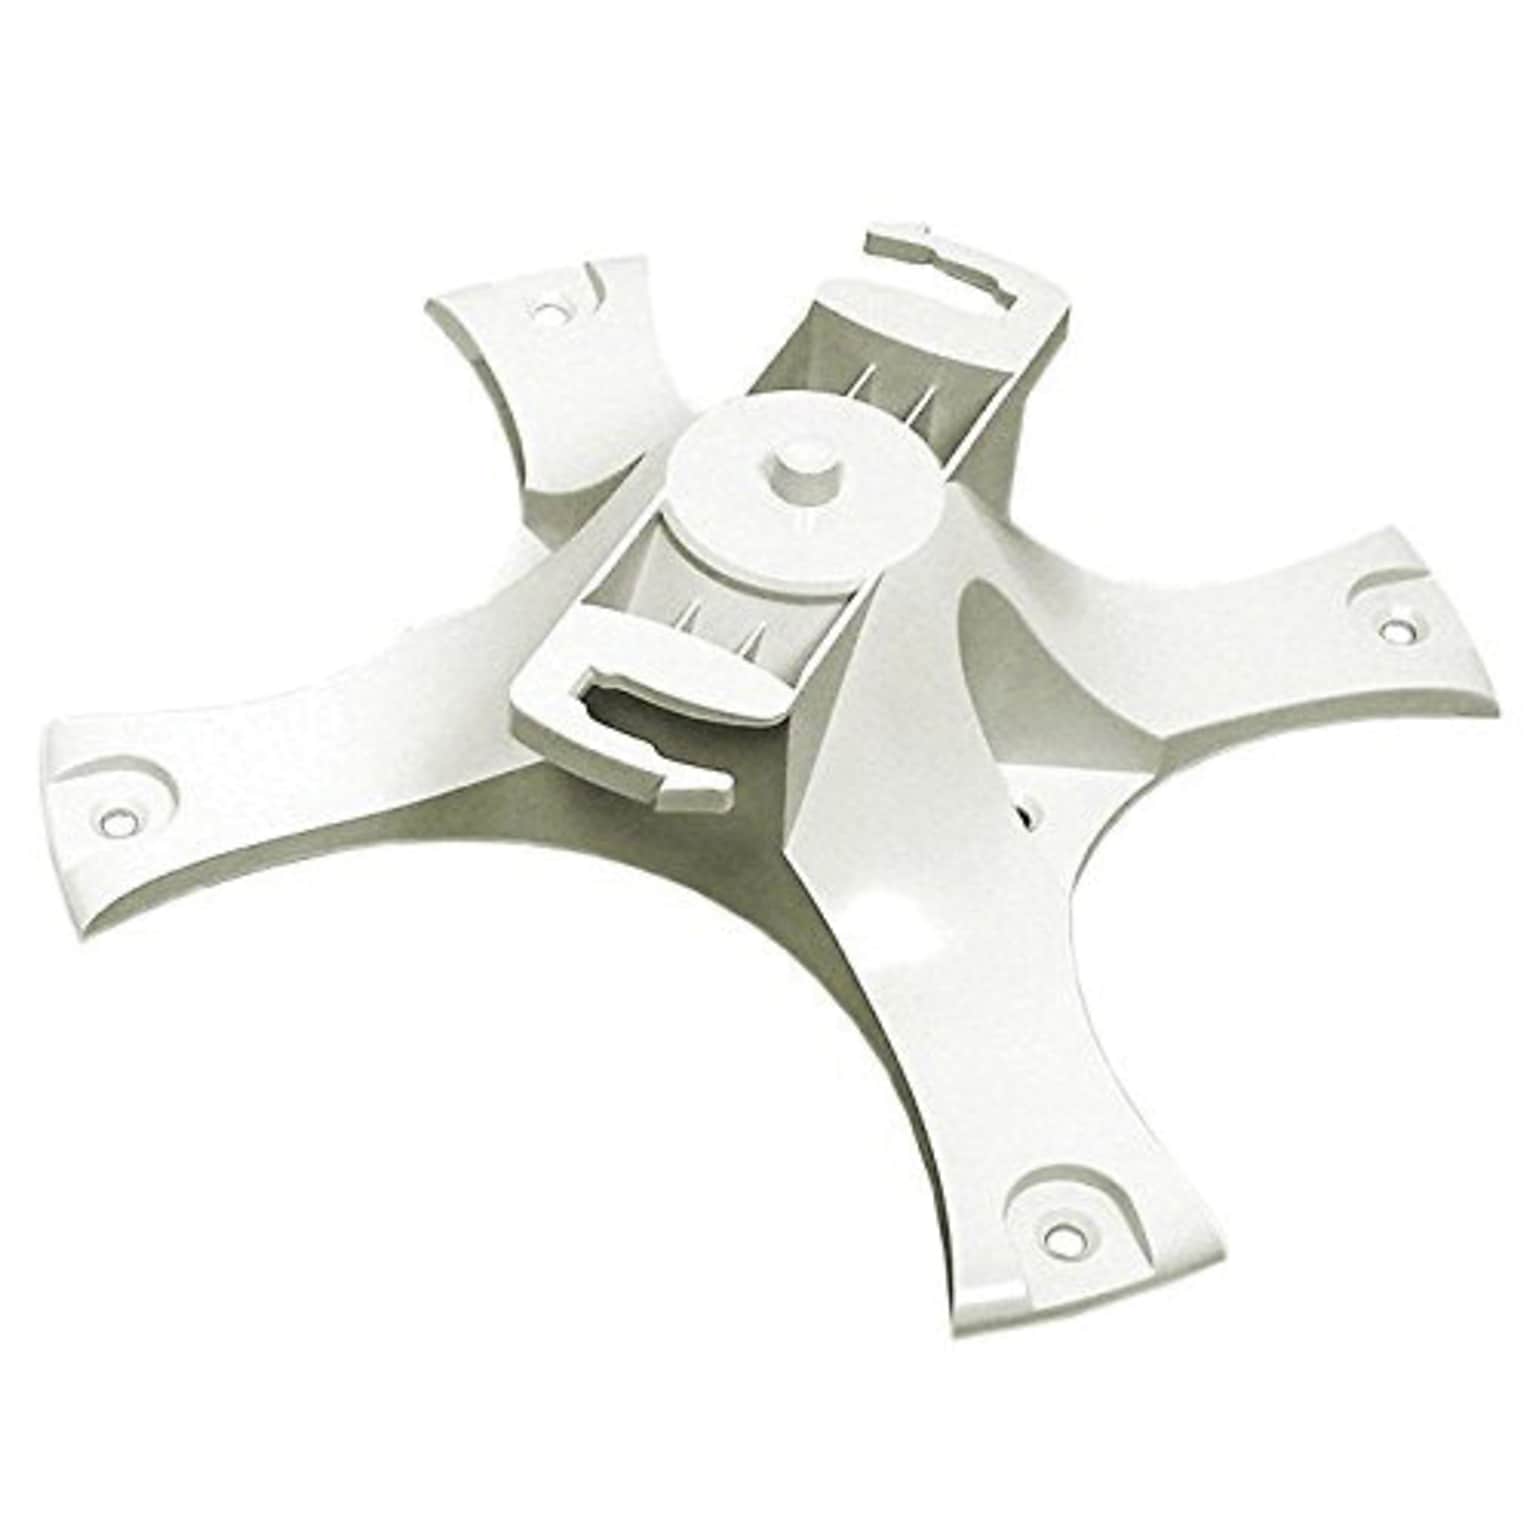 Aruba Flat Surface Wall/Ceiling Mount for AP-214/AP-215 Access Point, White (JW047A)